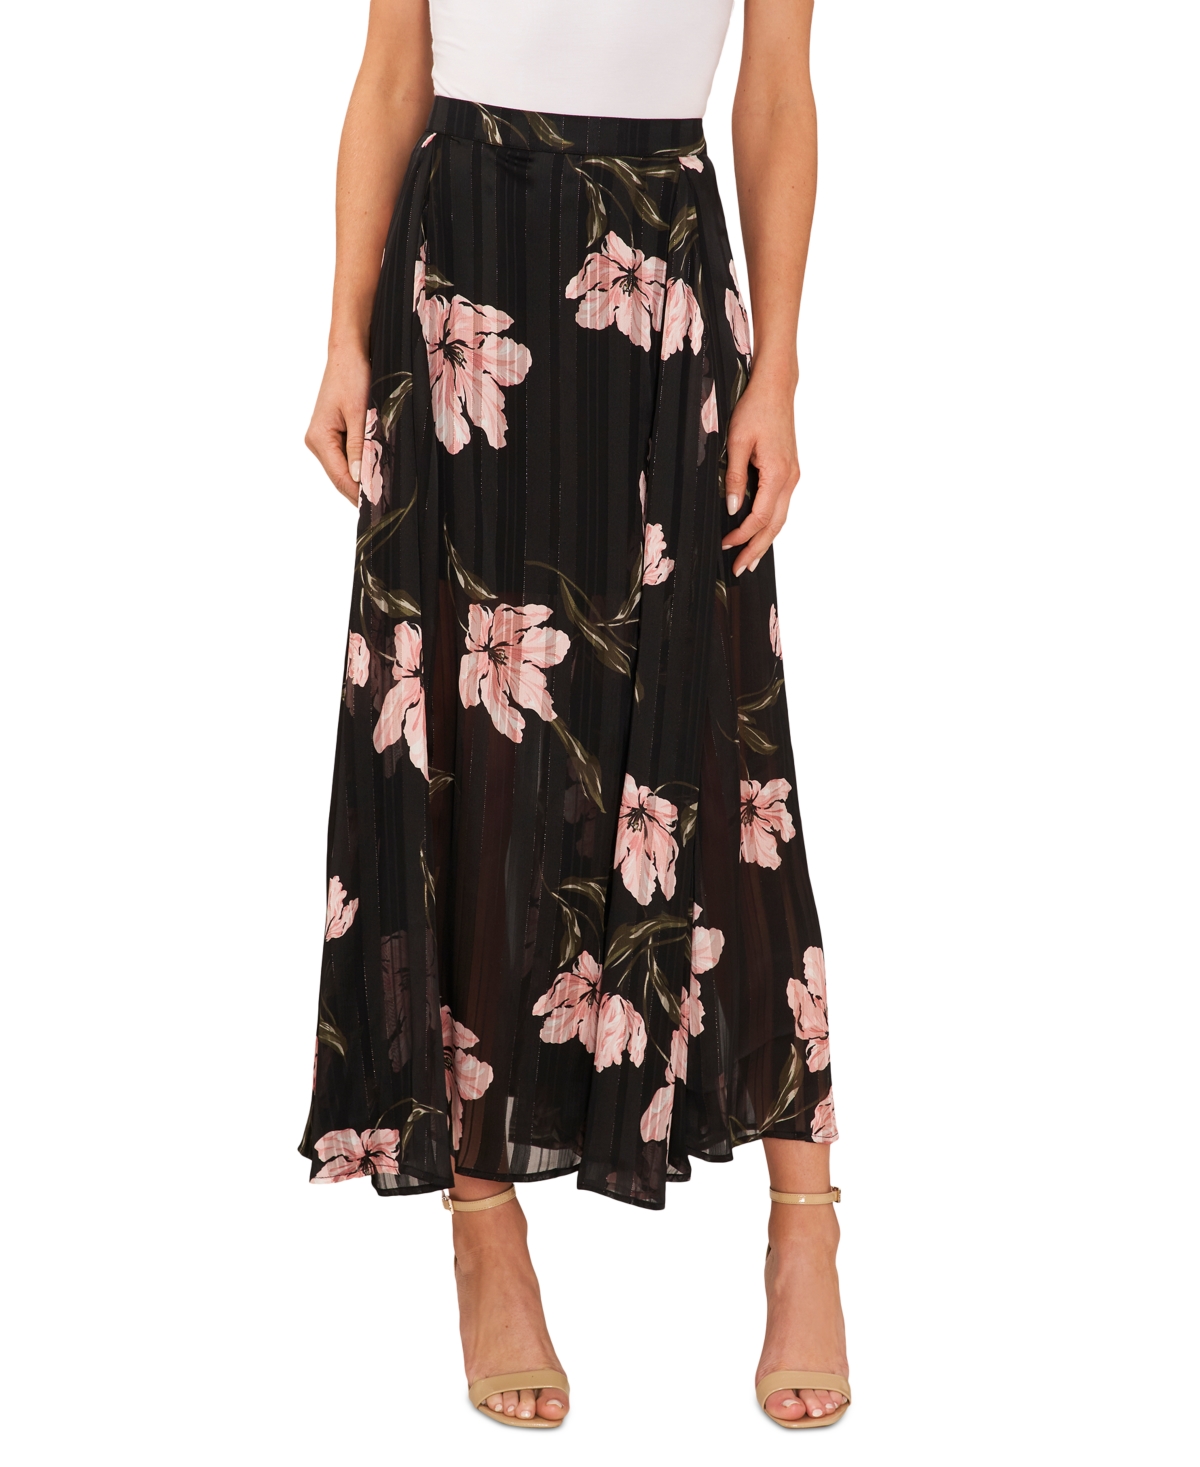 CECE WOMEN'S PLEATED FLORAL MAXI SKIRT